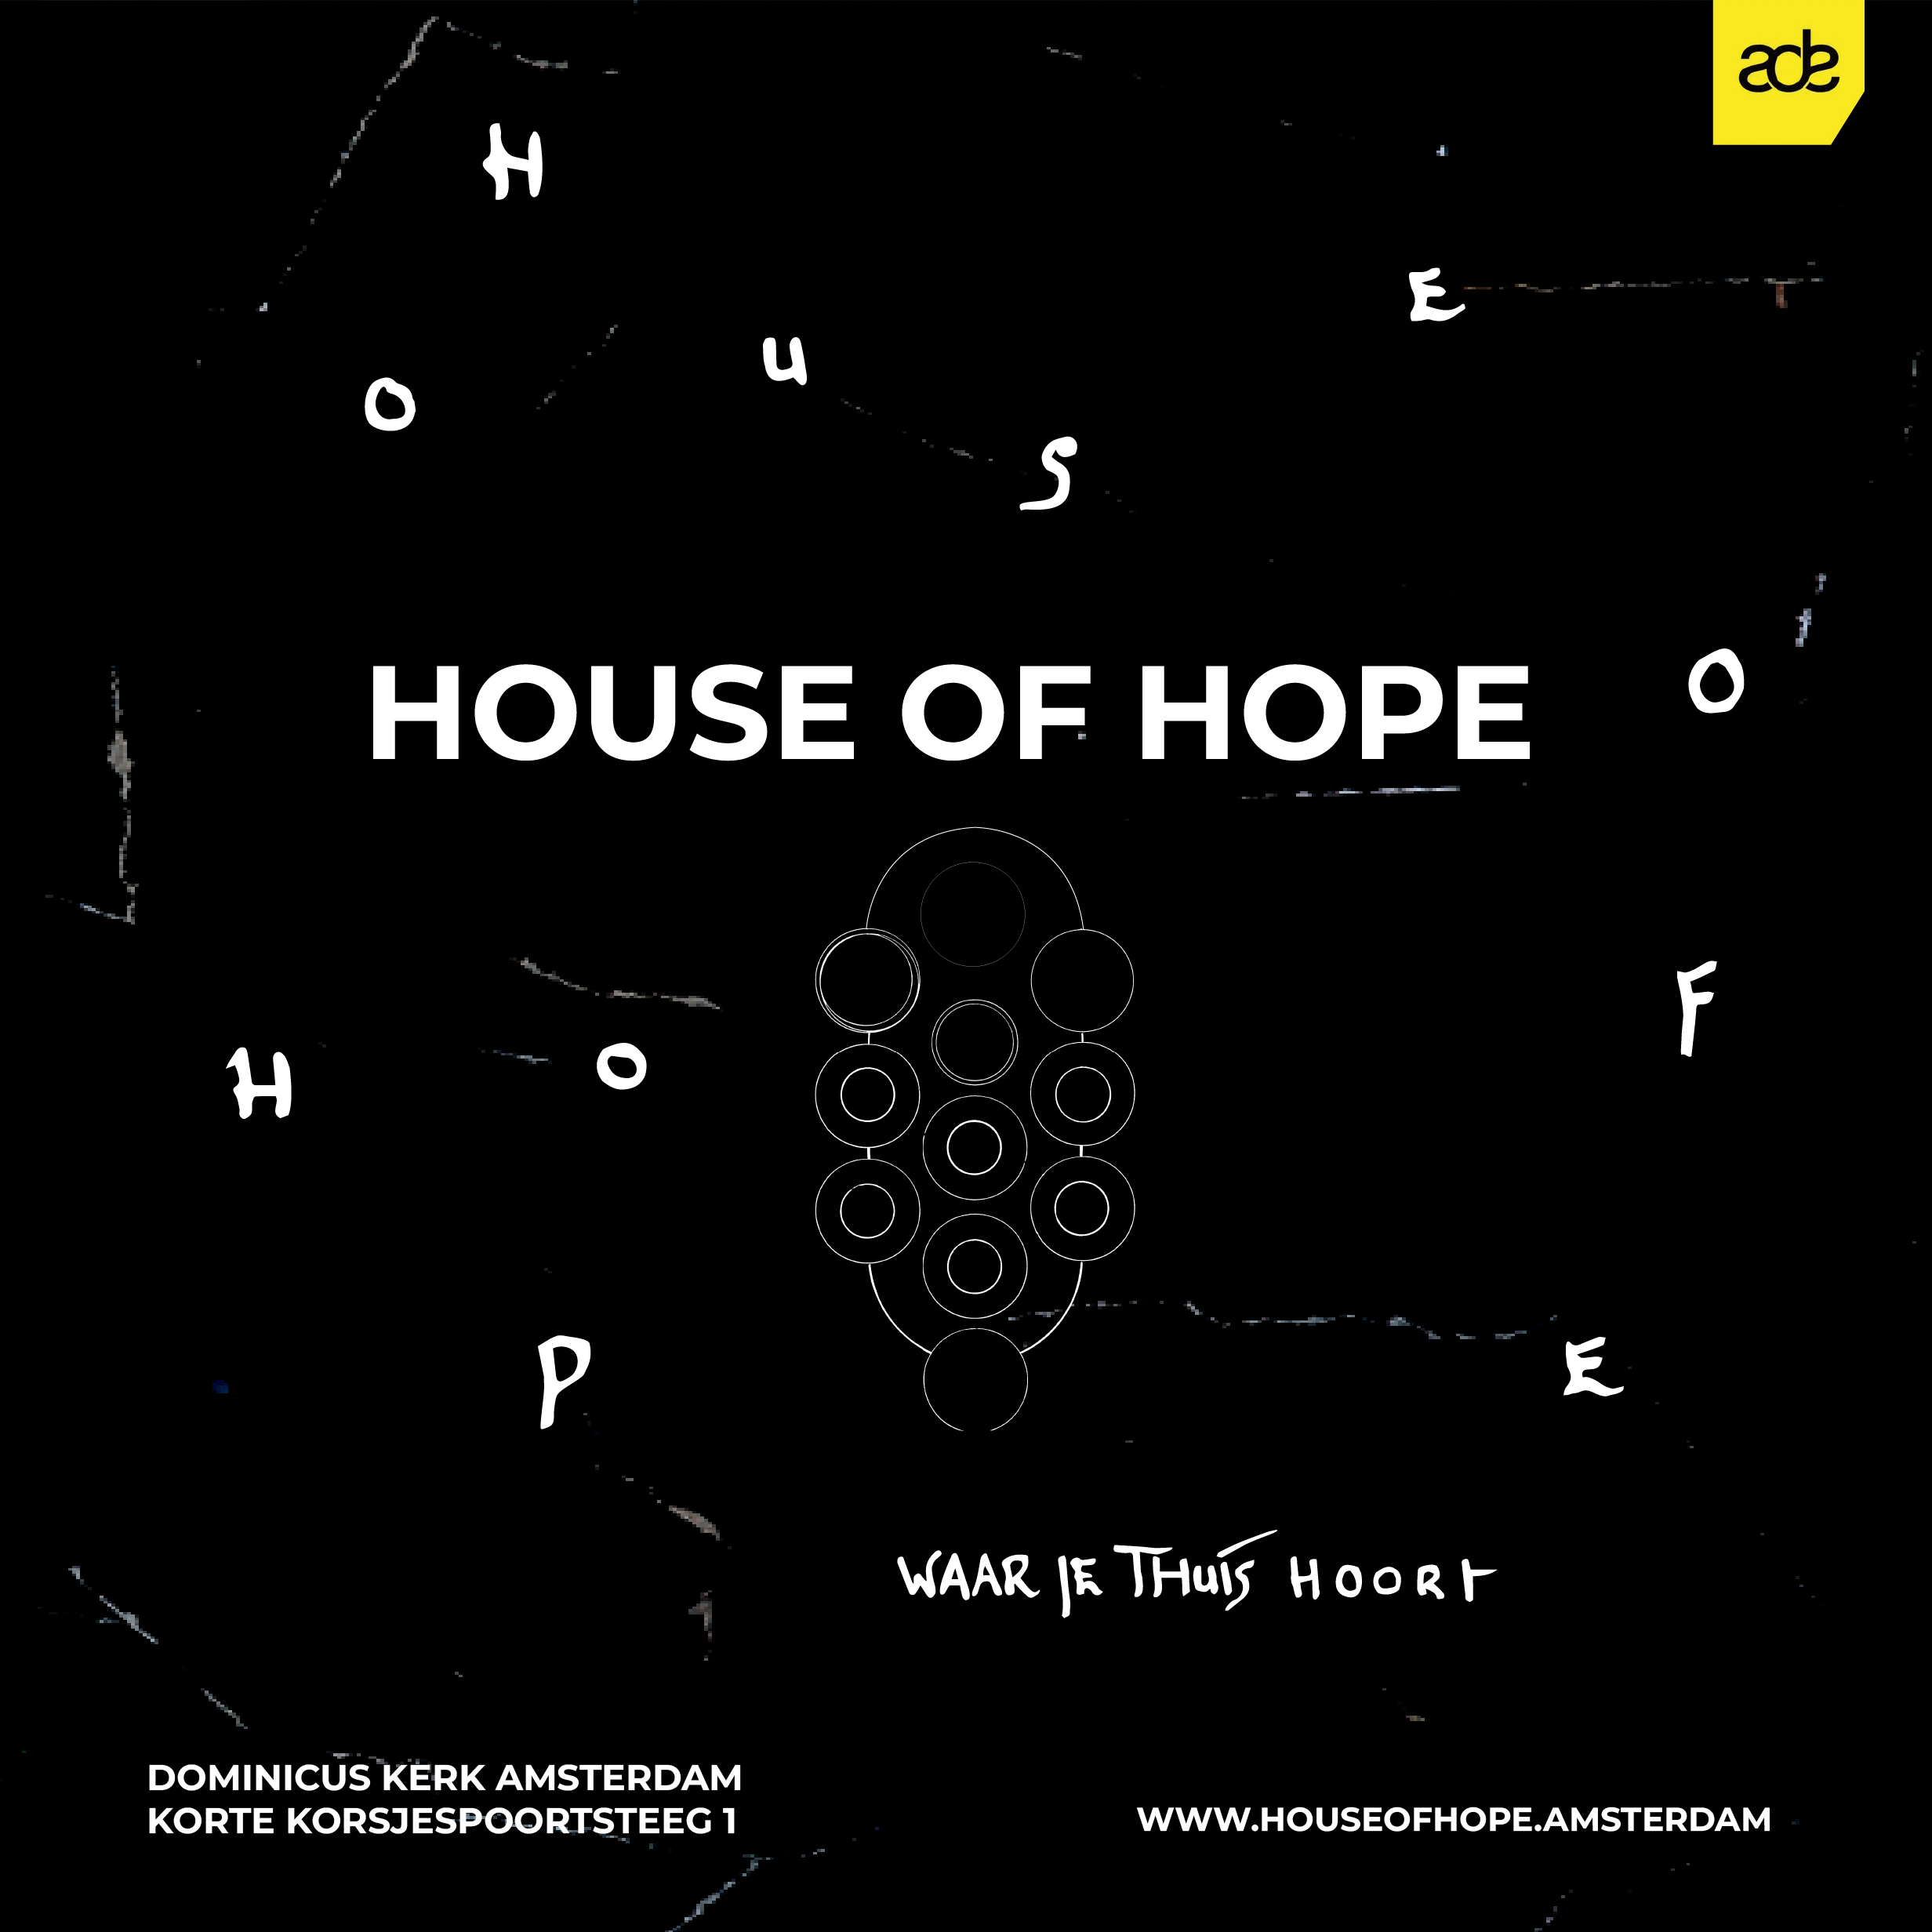 House of Hope - The street shows the way - ADE - Página frontal